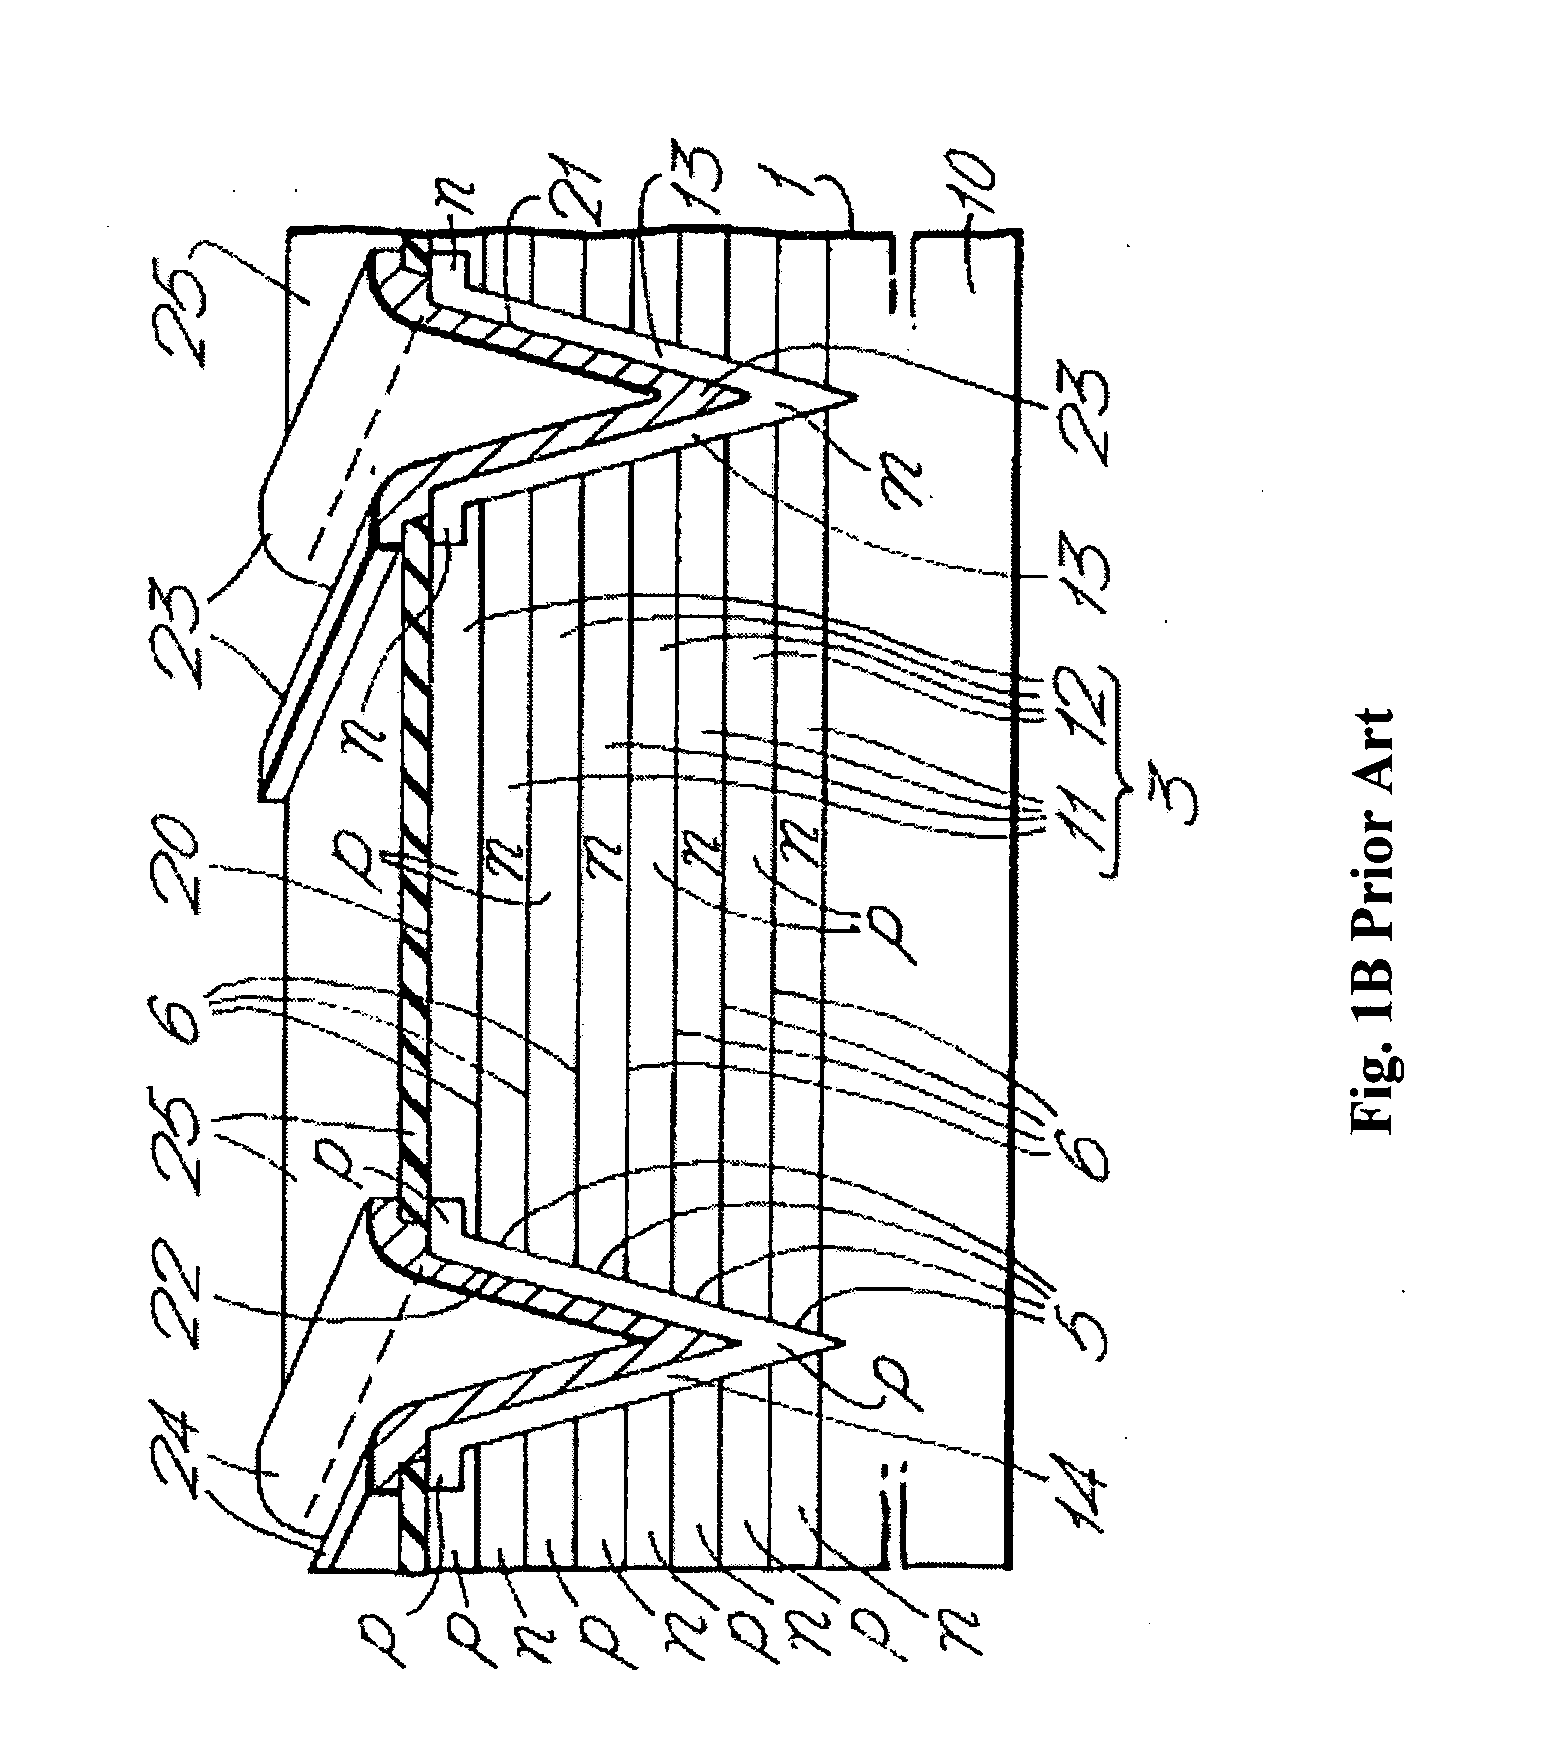 Lateral super junction device with high substrate-drain breakdwon and built-in avalanche clamp diode